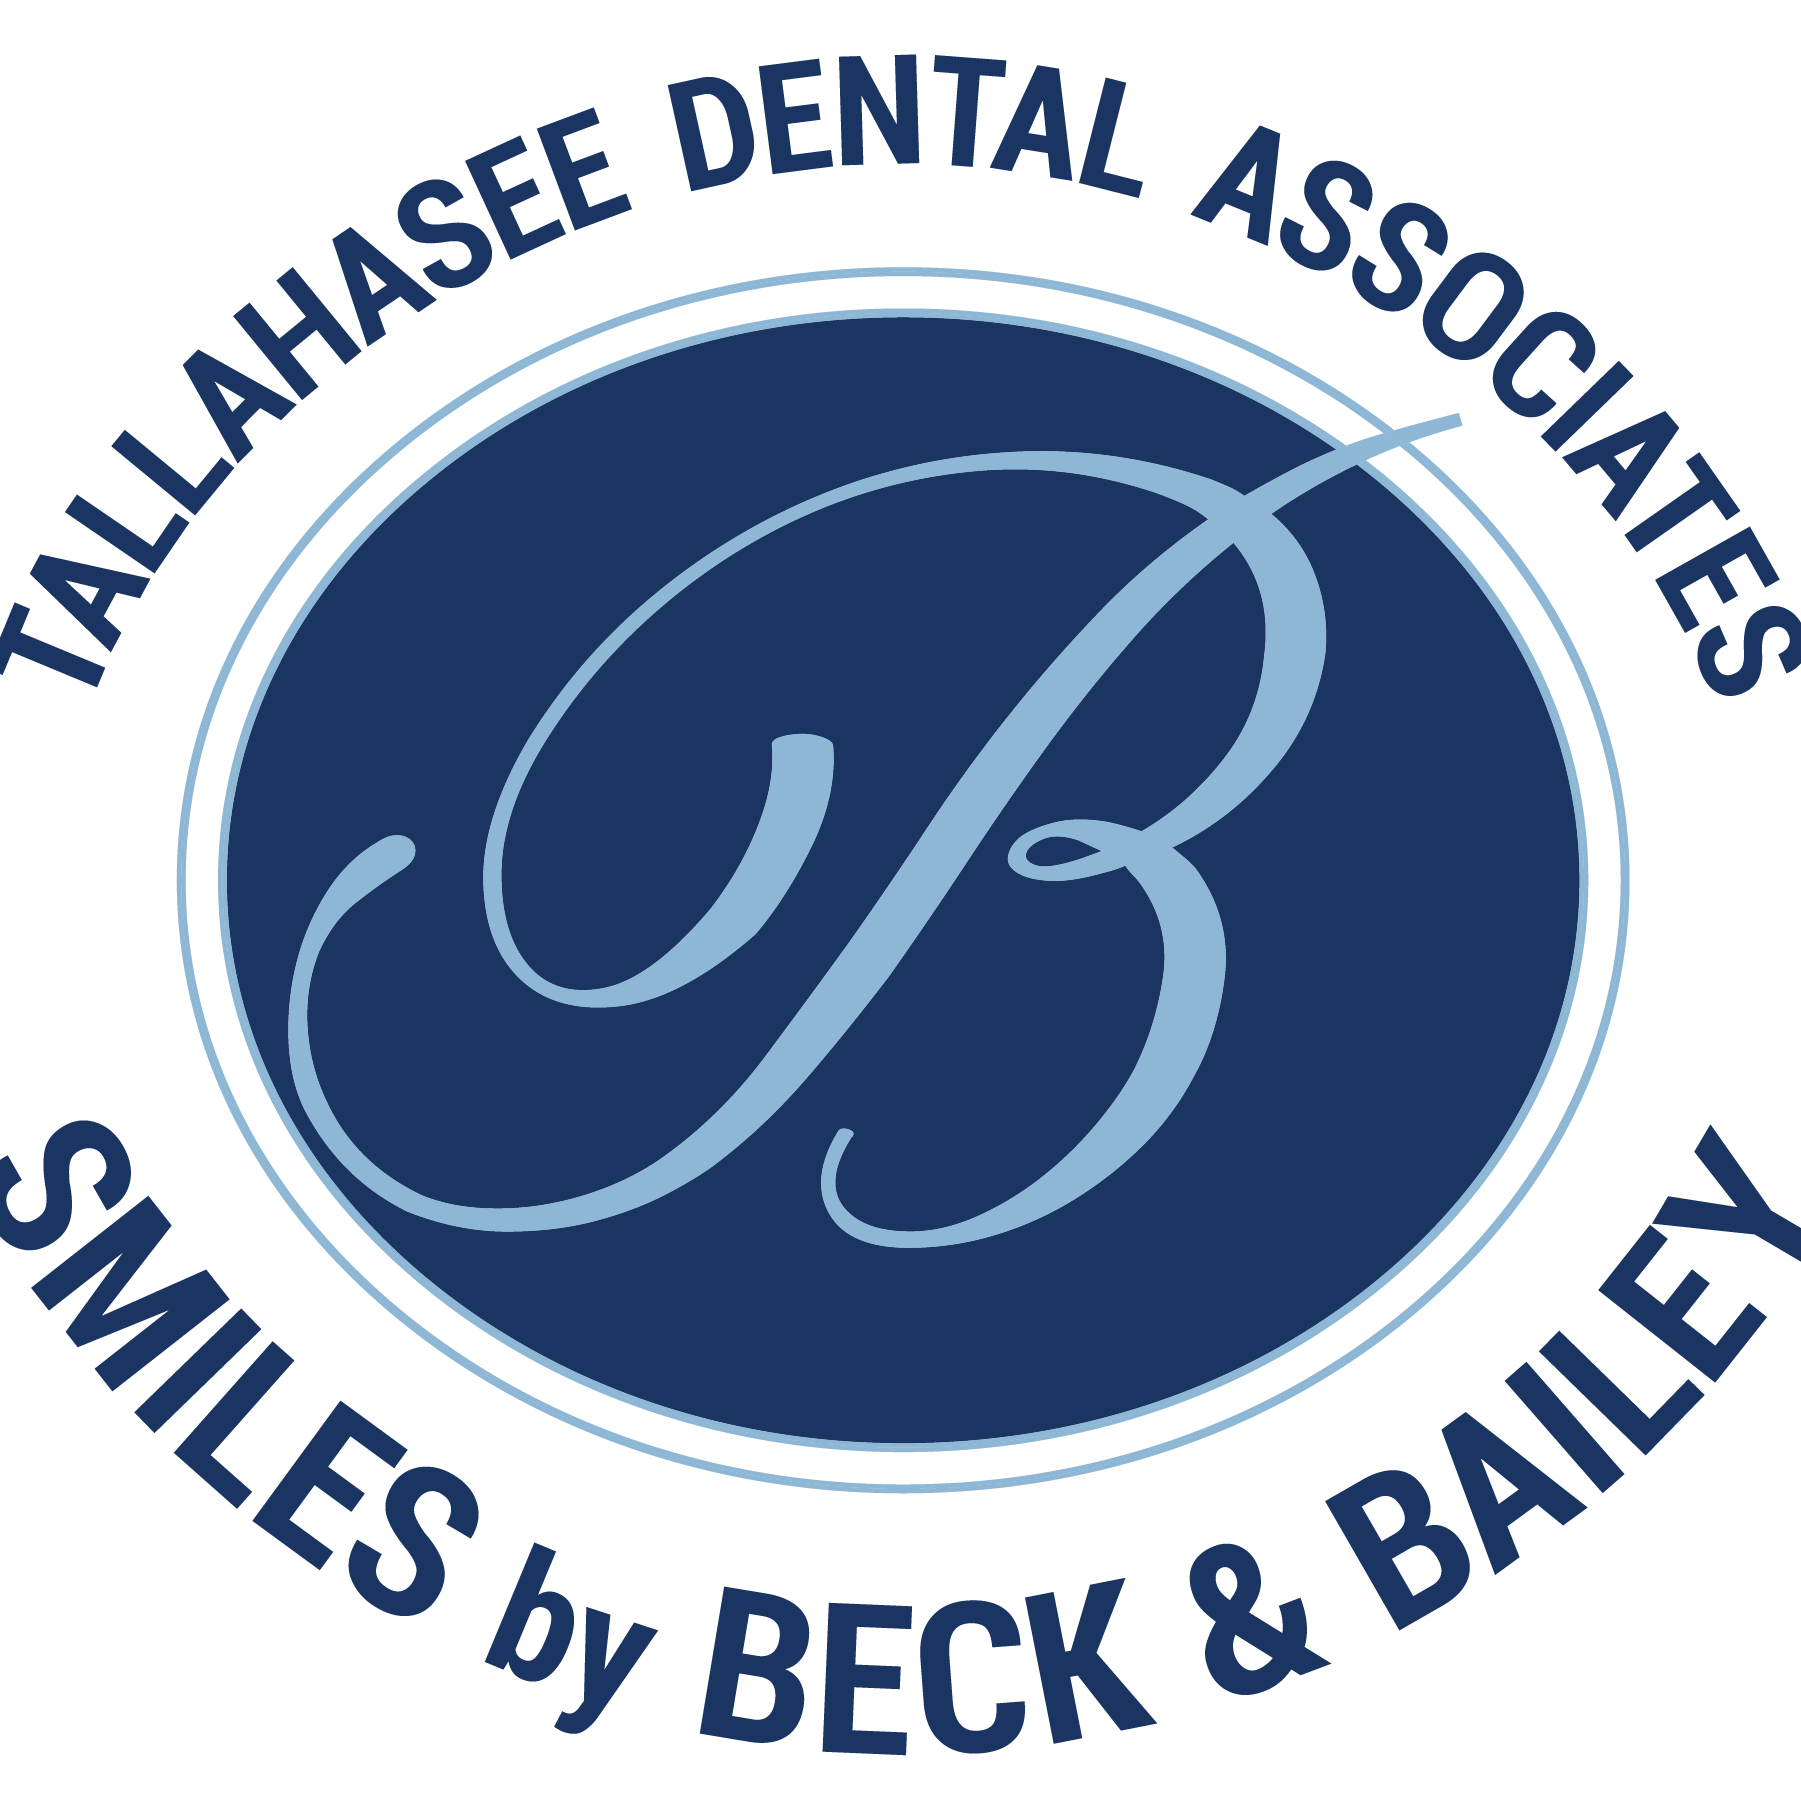 Smiles By Beck & Bailey - Tallahassee, FL 32308 - (850)656-2636 | ShowMeLocal.com